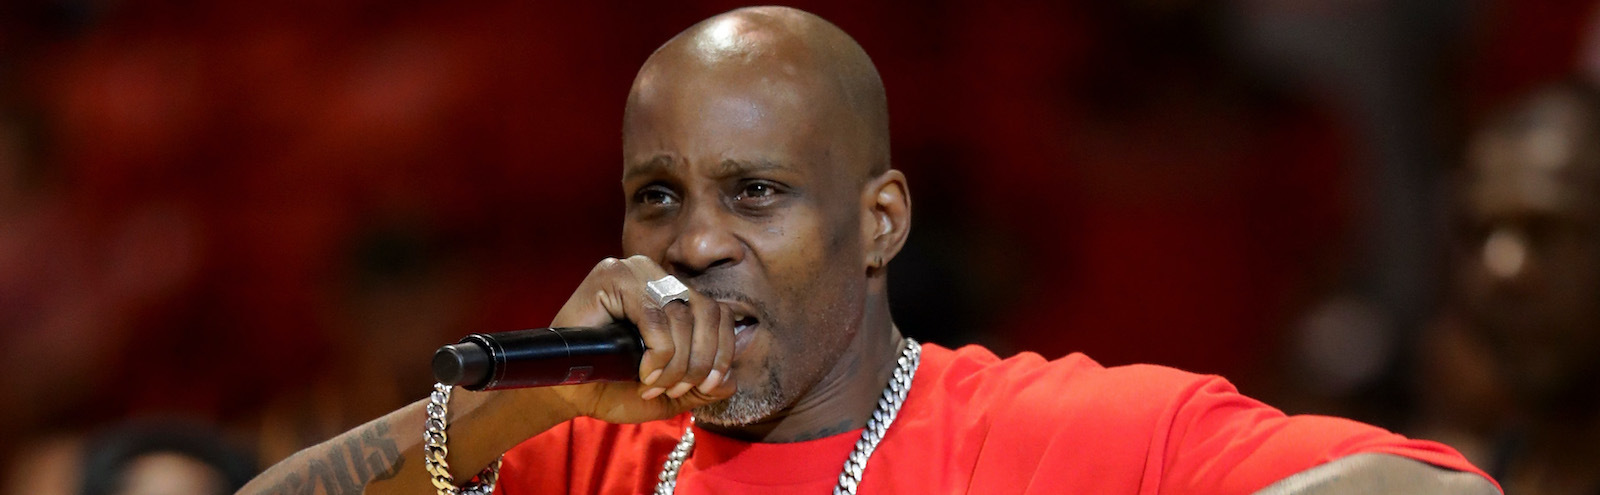 DMX Was Apparently A Huge Fan Of The Classic ‘80s Sitcom ‘The Golden Girls’